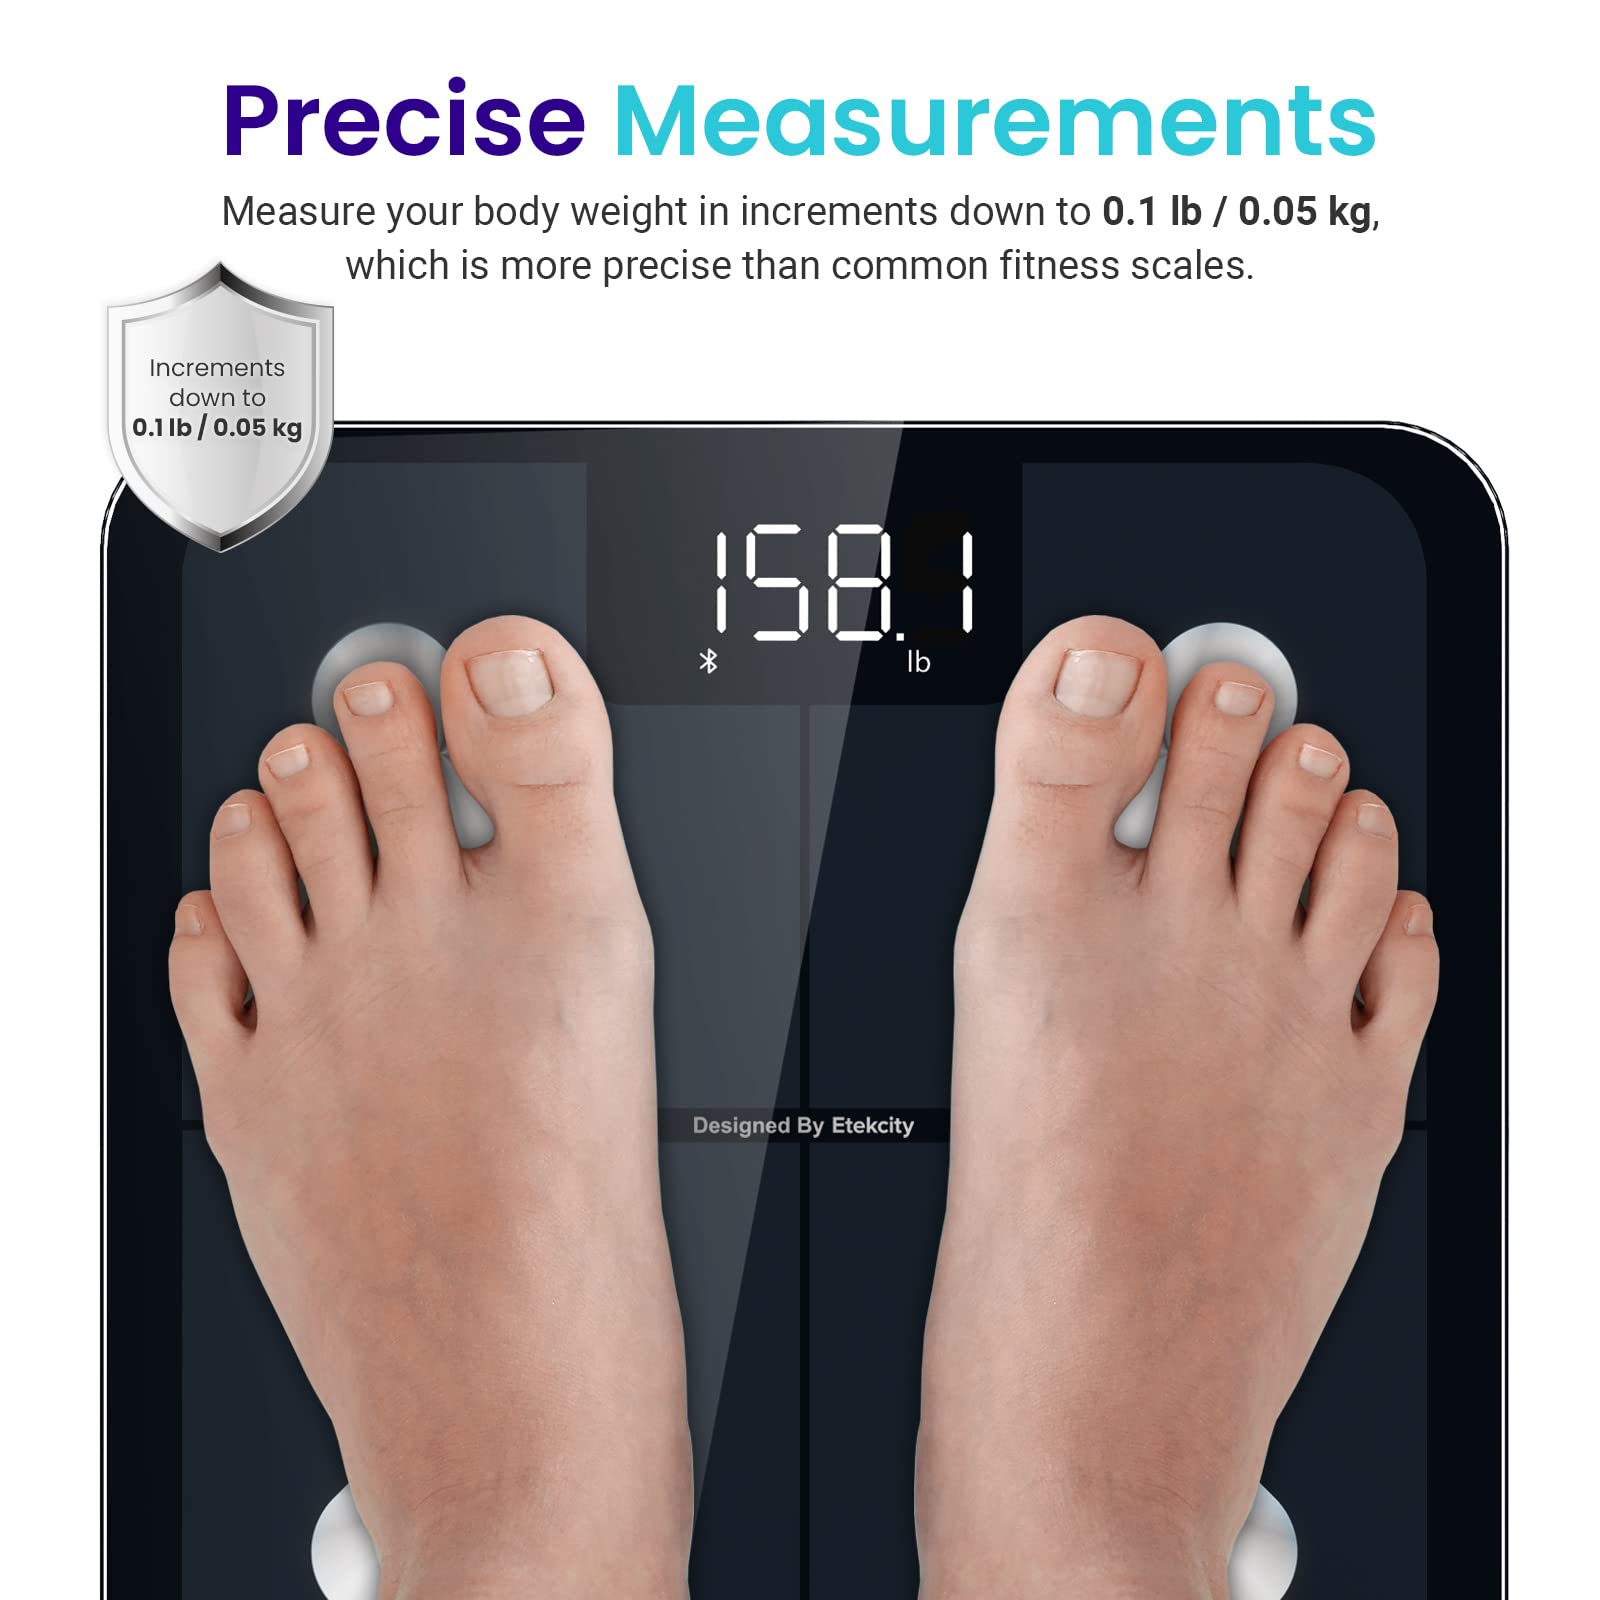 Etekcity 0.1g Food Kitchen Scale, 11lb/5kg, Stainless Steel Silver & Smart Scale for Body Weight, Accurate to 0.05lb (0.02kg) Digital Bathroom Weighing Machine, 400lb